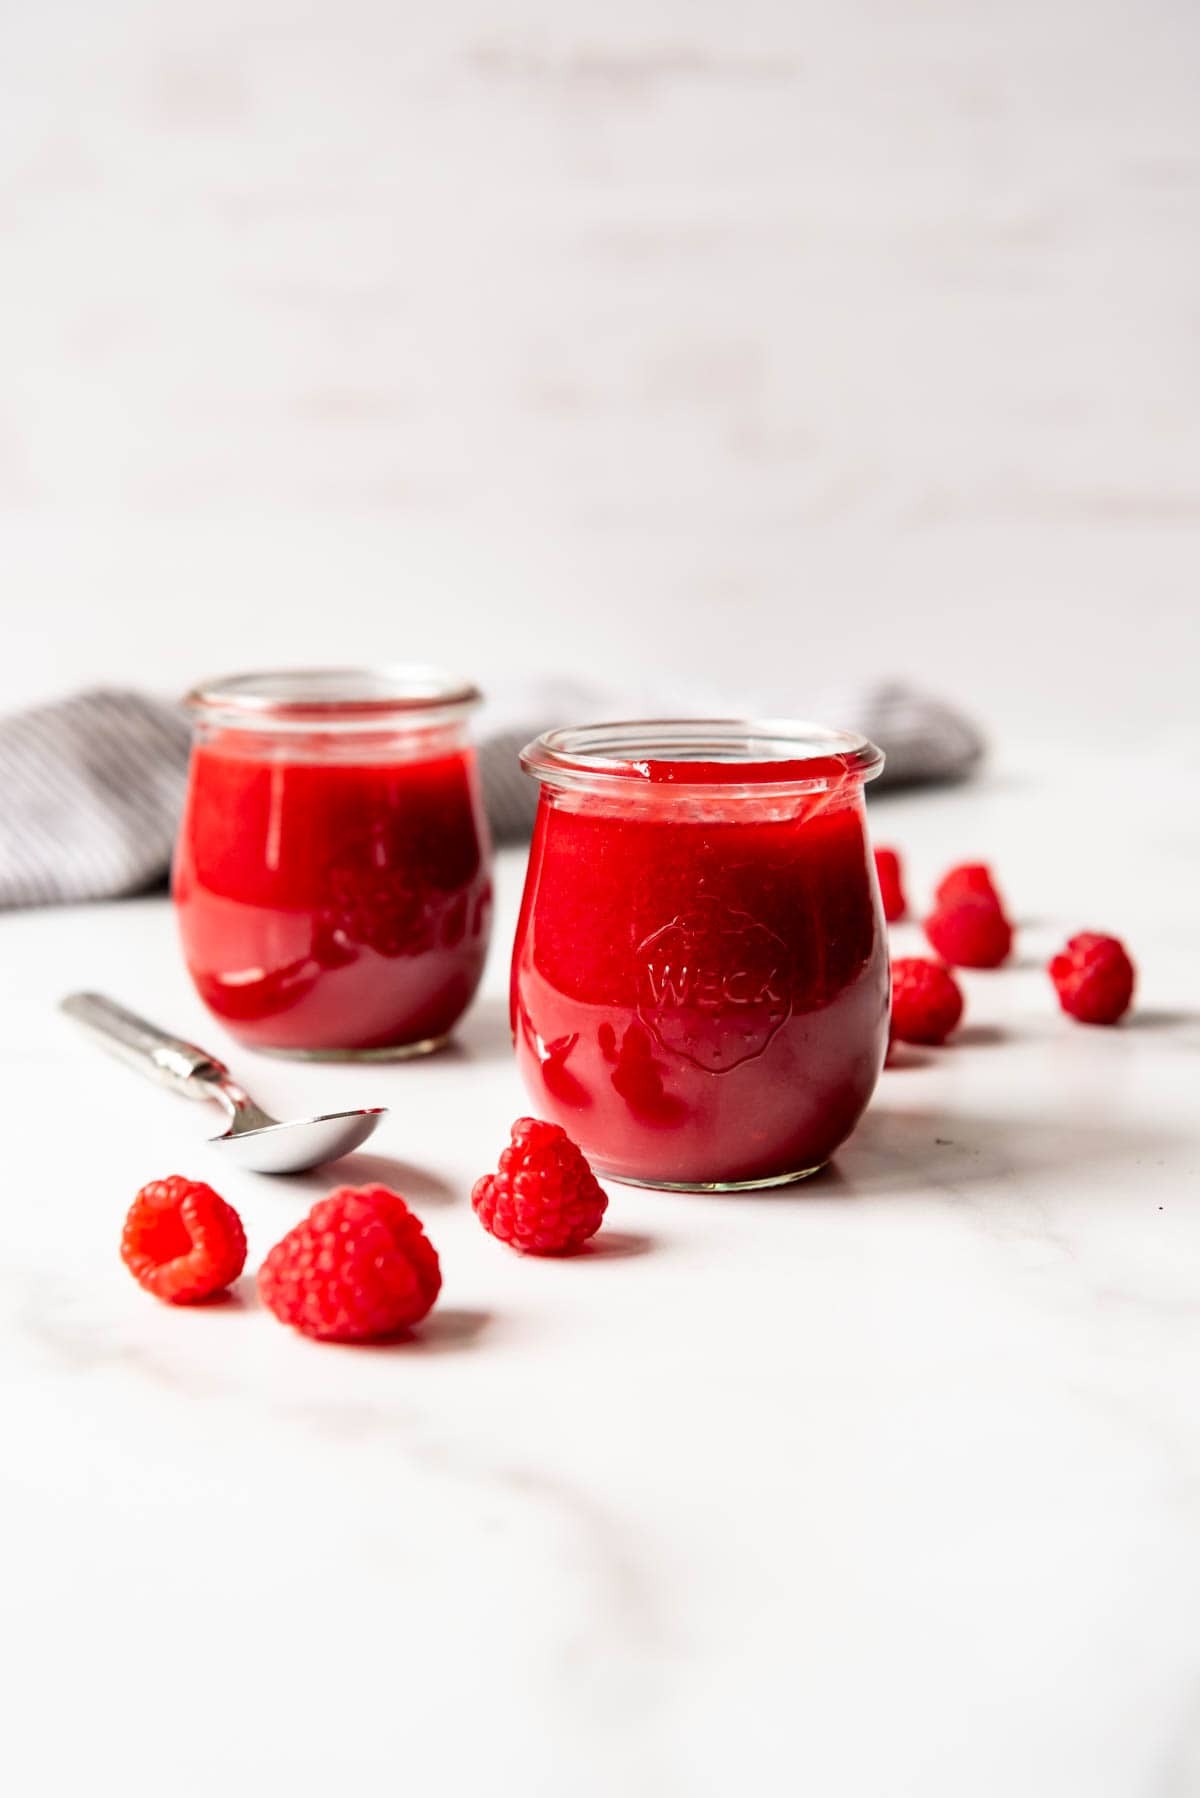 An image of two jars of homemade raspberry coulis sauce.